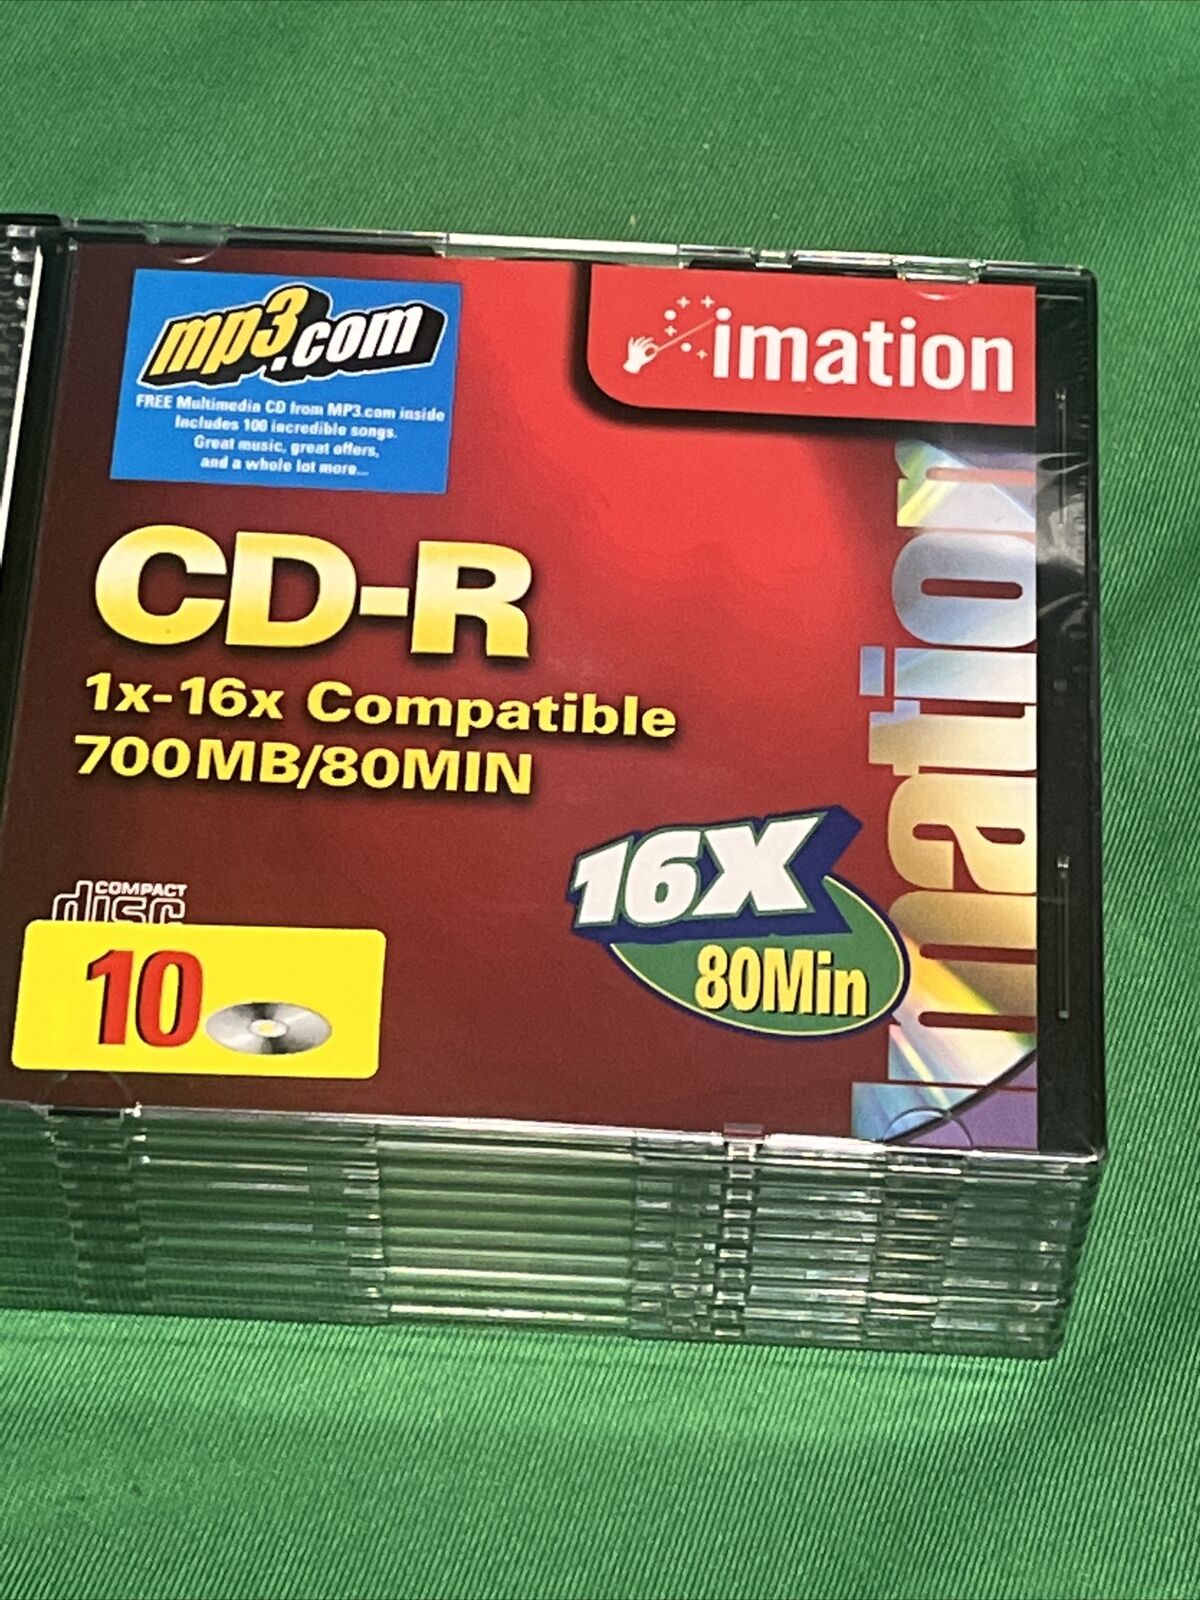 CD-R 10-PACK Imation 80 minutes 700 MB in Jewel Cases 1x-16 Compatible